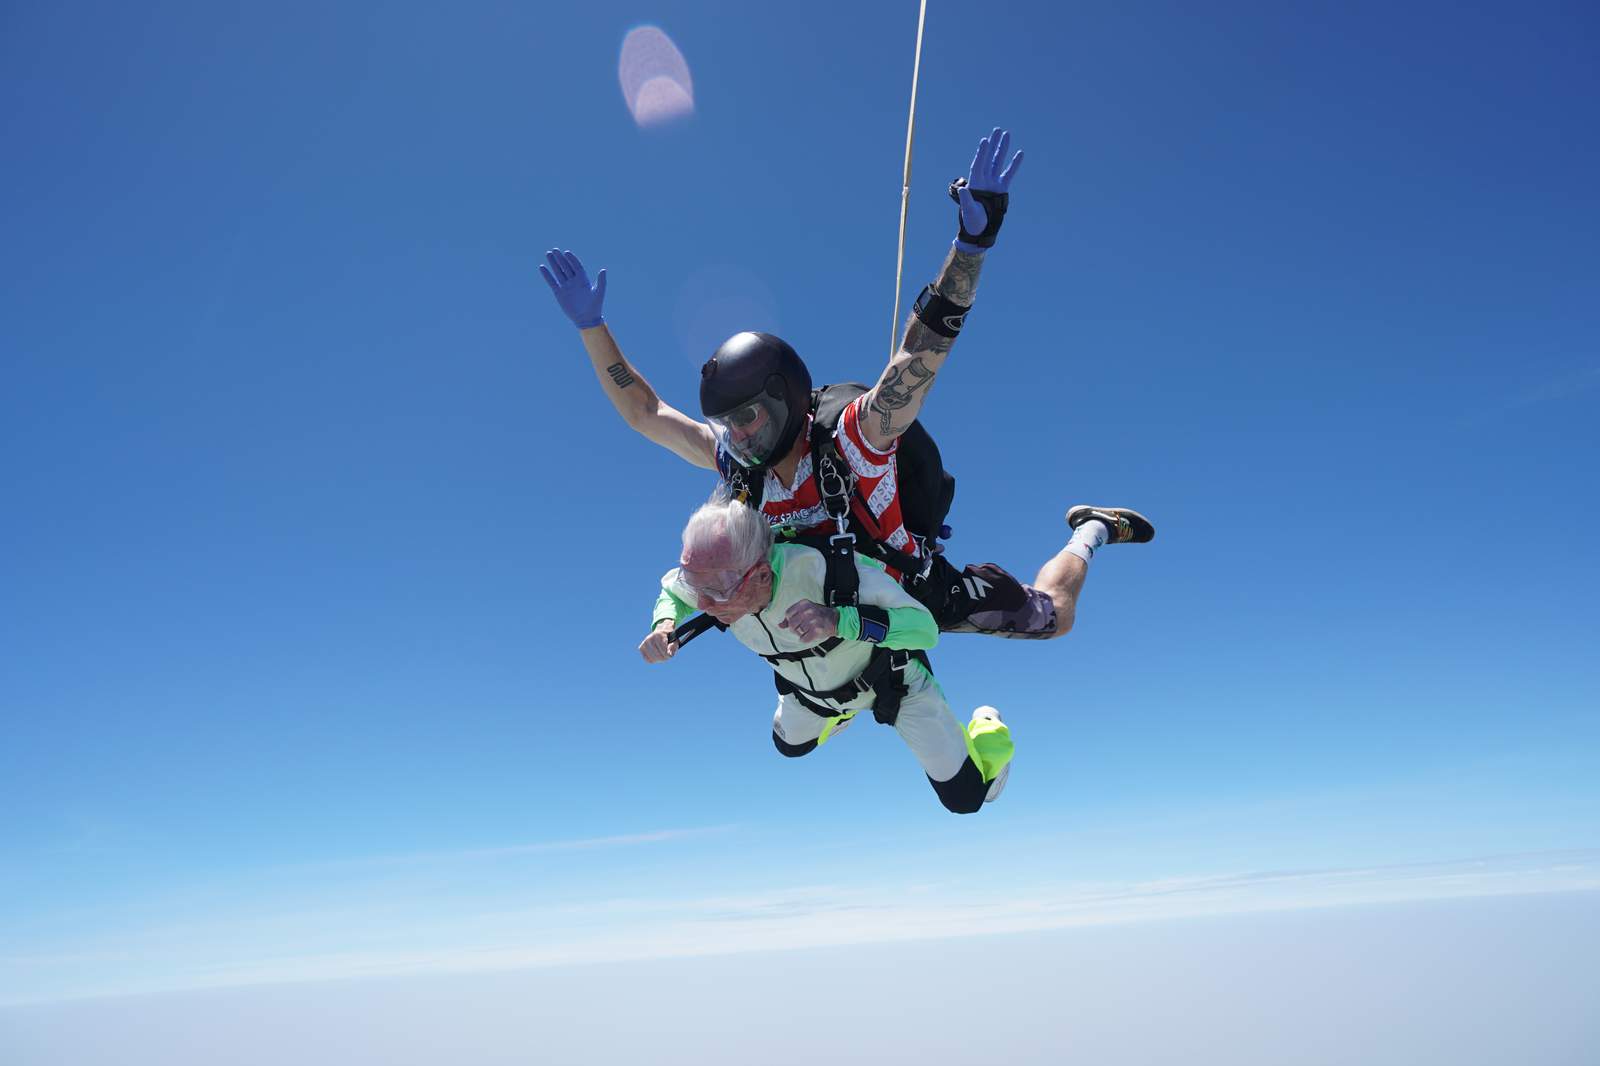 Report: 103-year-old in San Marcos breaks world record for oldest tandem skydive